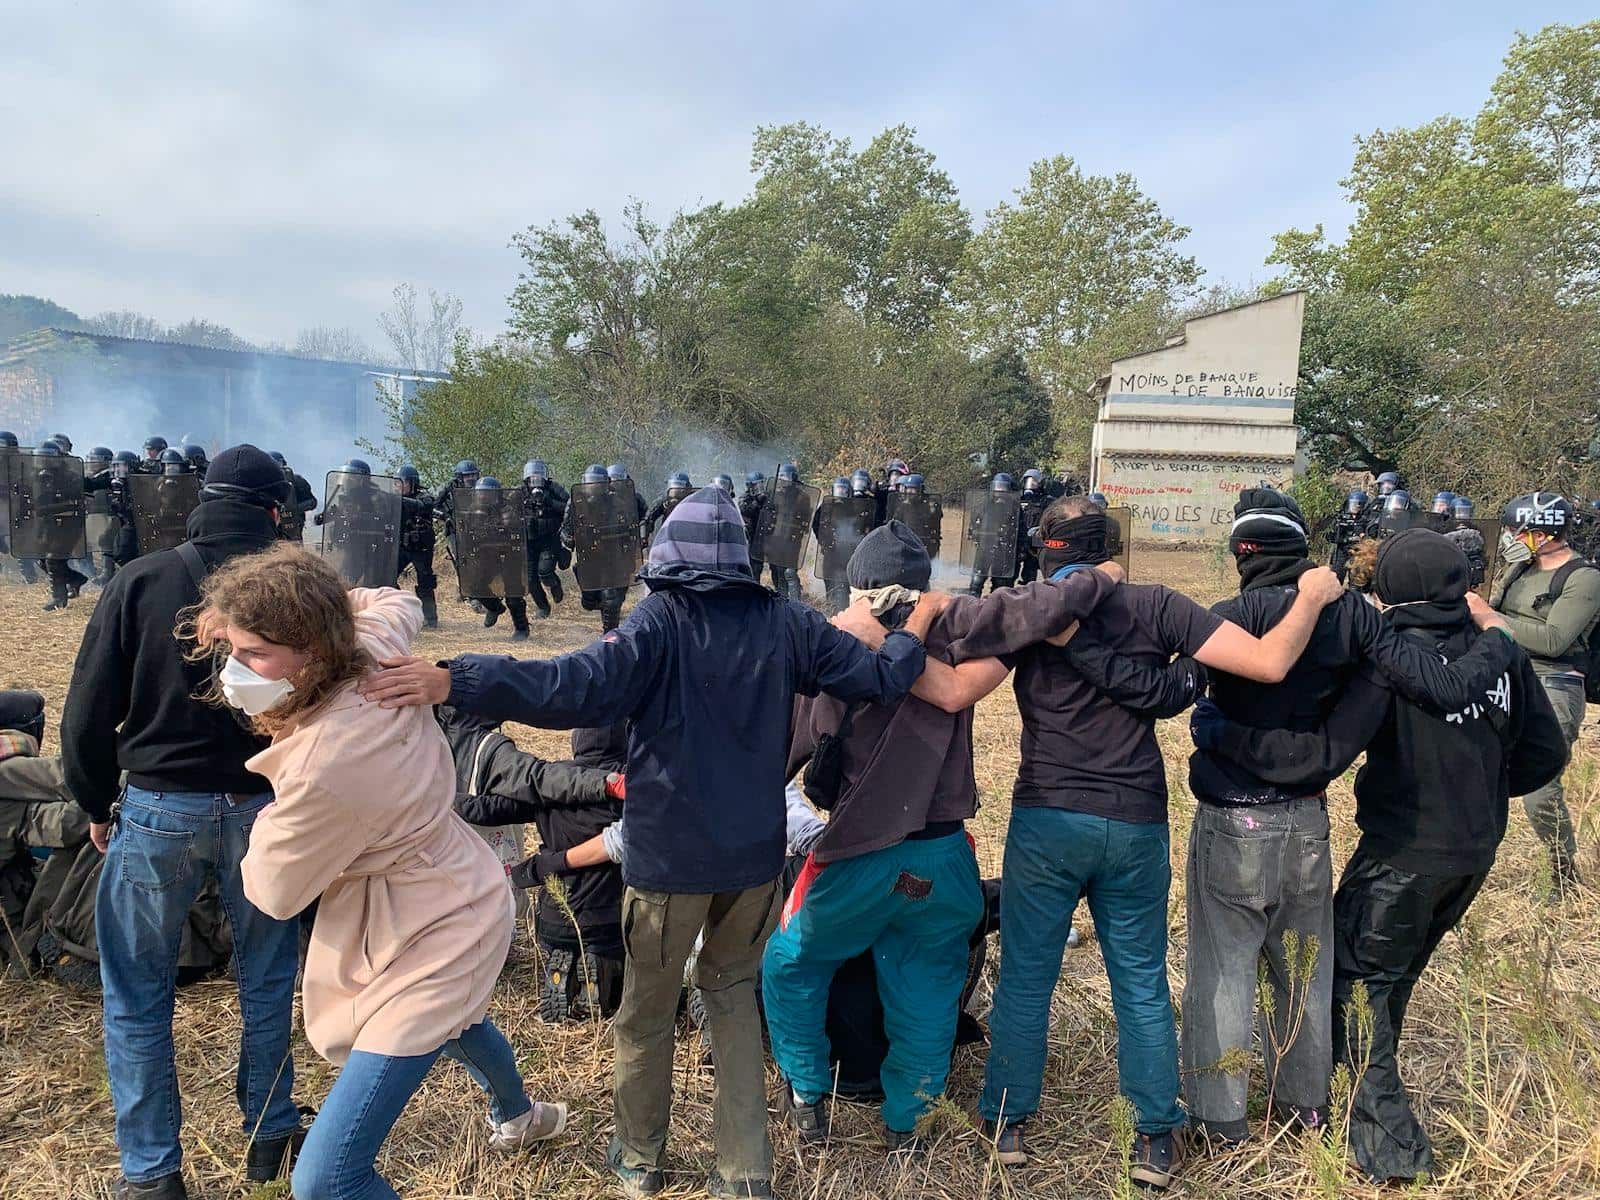 Activists stand arm in arm on a field as riot police charge towards them